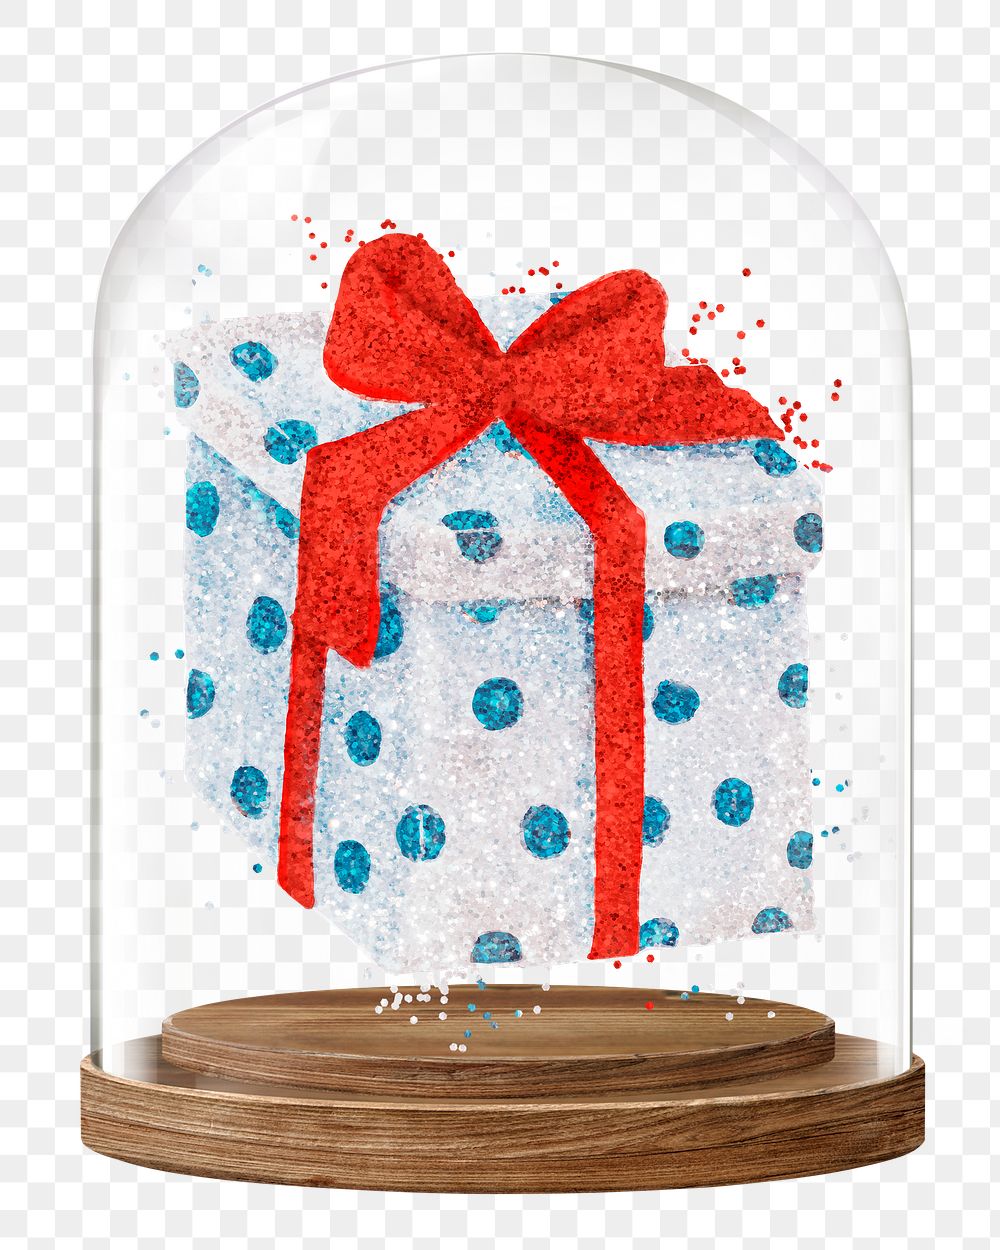 Glittery gift box png glass dome sticker, Christmas concept art, transparent background